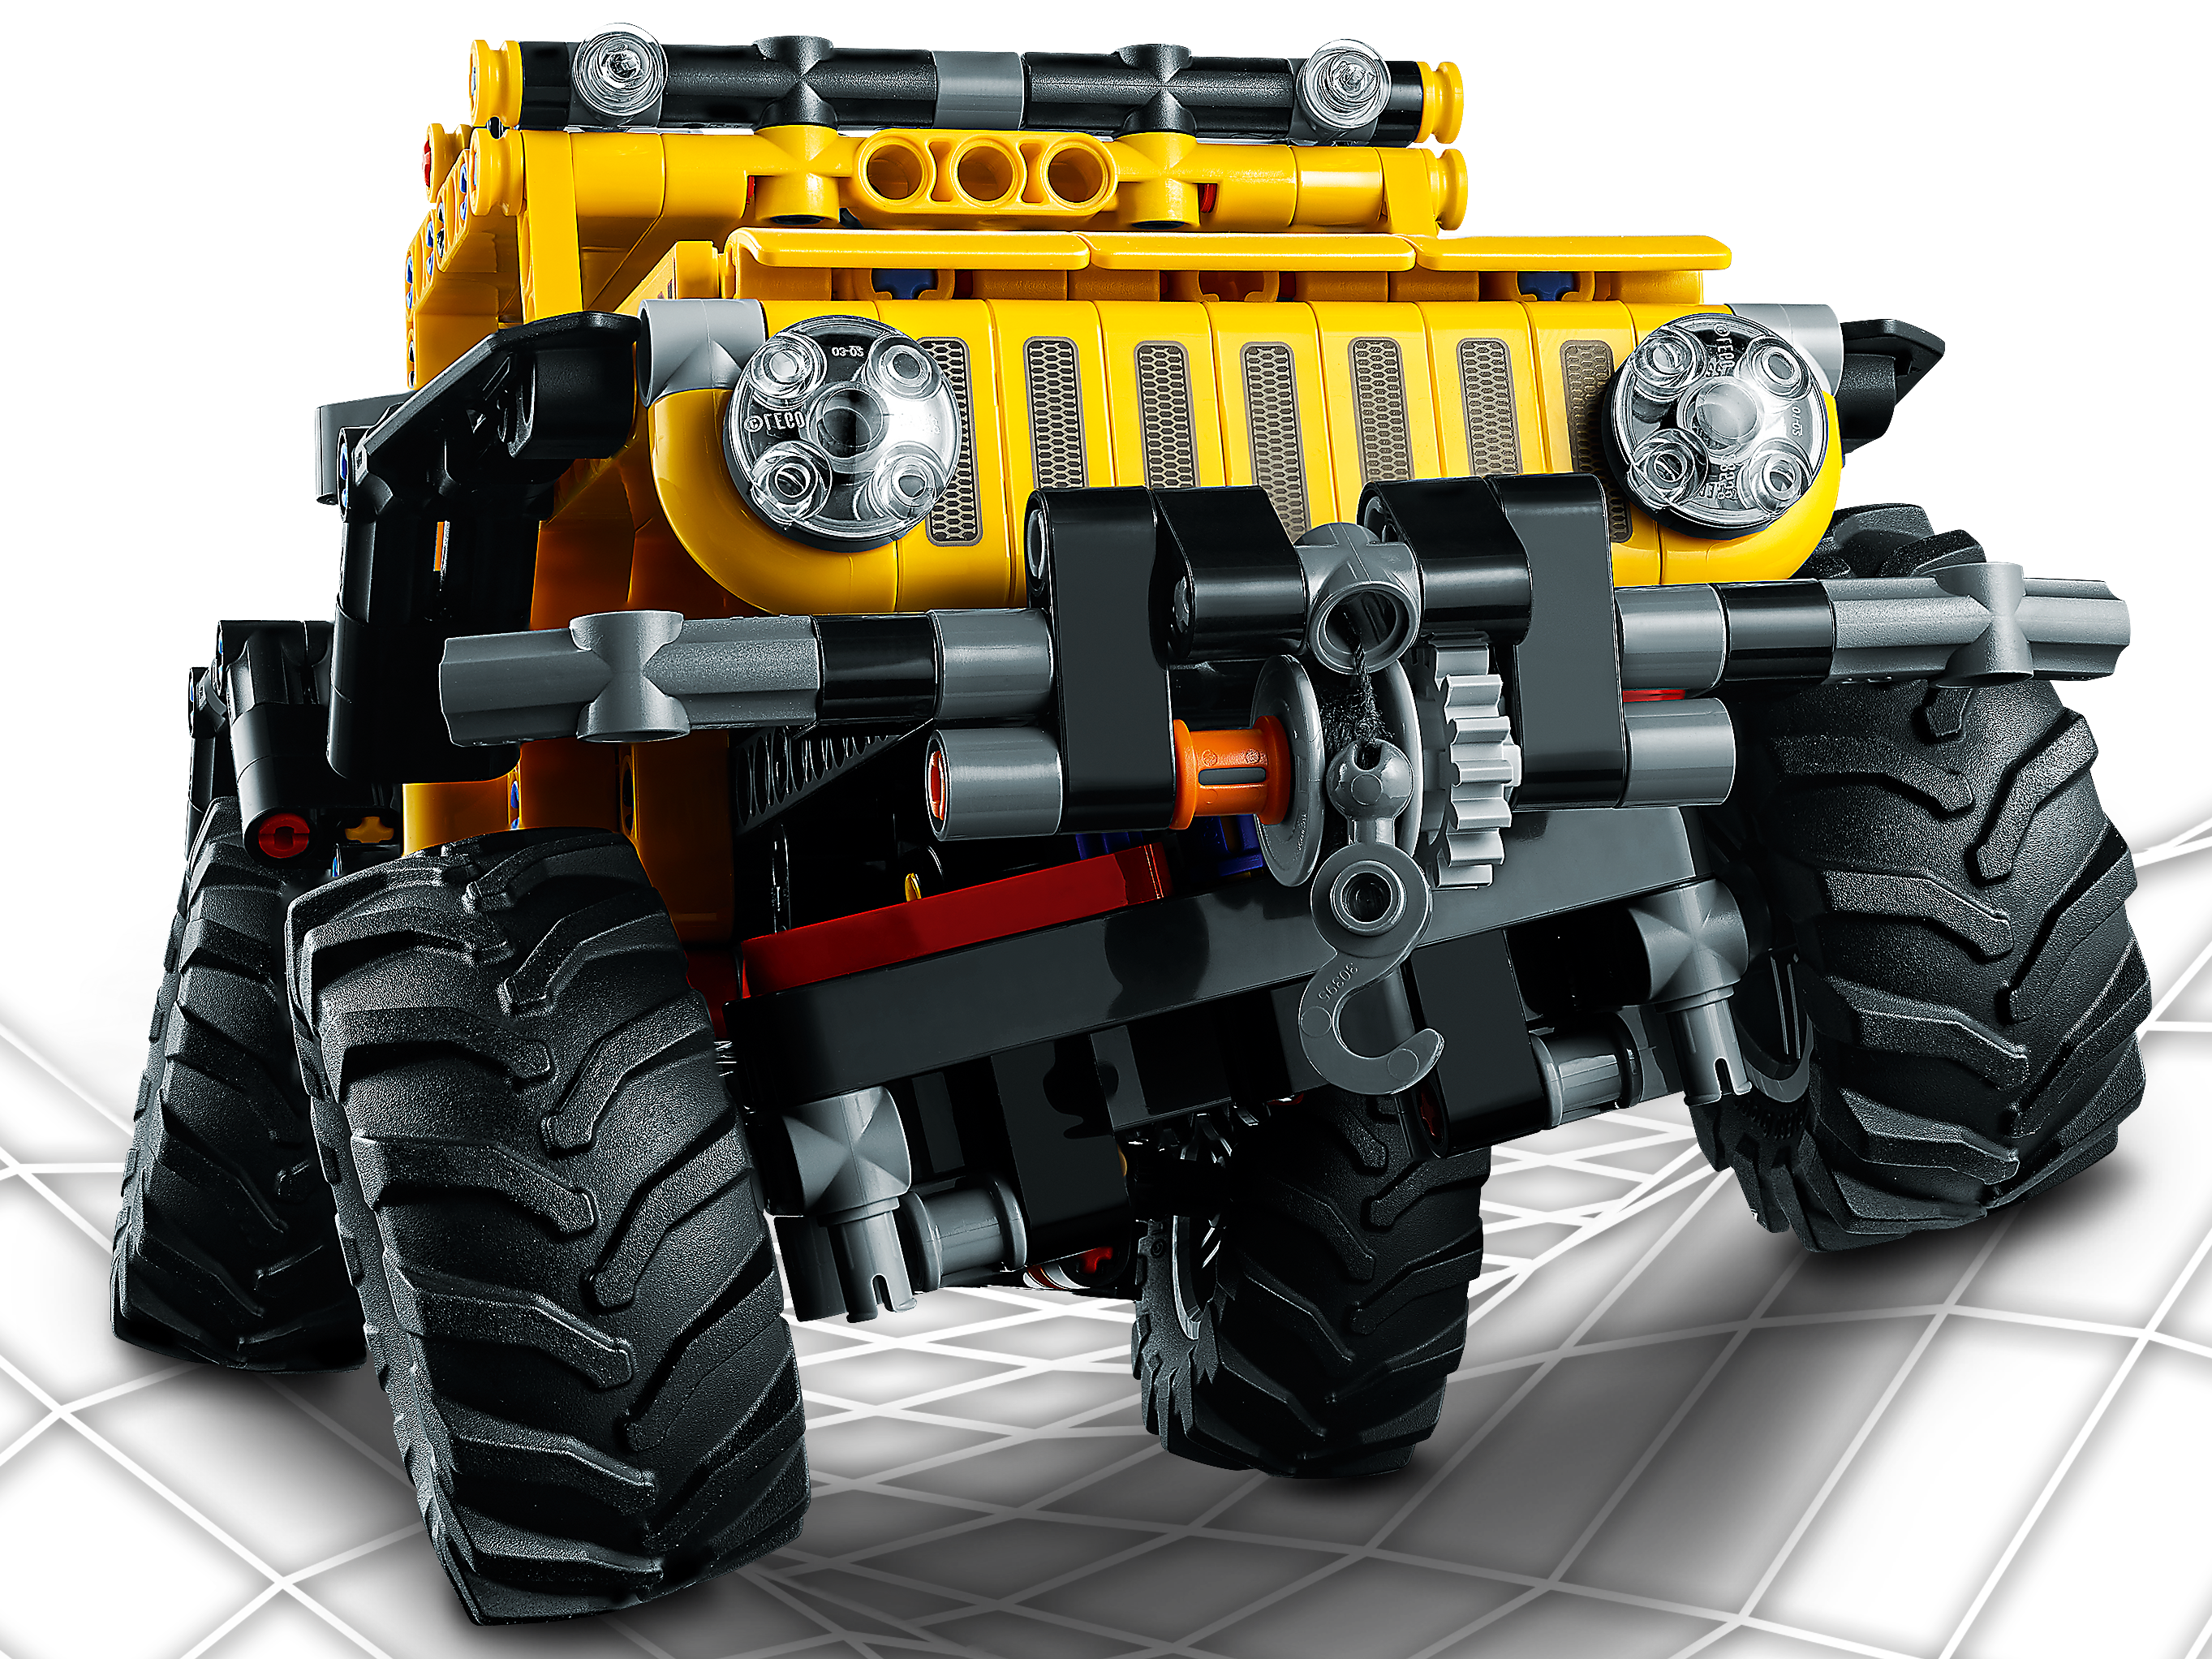  LEGO Technic Jeep Wrangler 4x4 Toy Car 42122 Model Building Kit  - All Terrain Off Roader SUV Set, Authentic and Functional Design, STEM  Birthday Gift Idea for Kids, Boys, and Girls